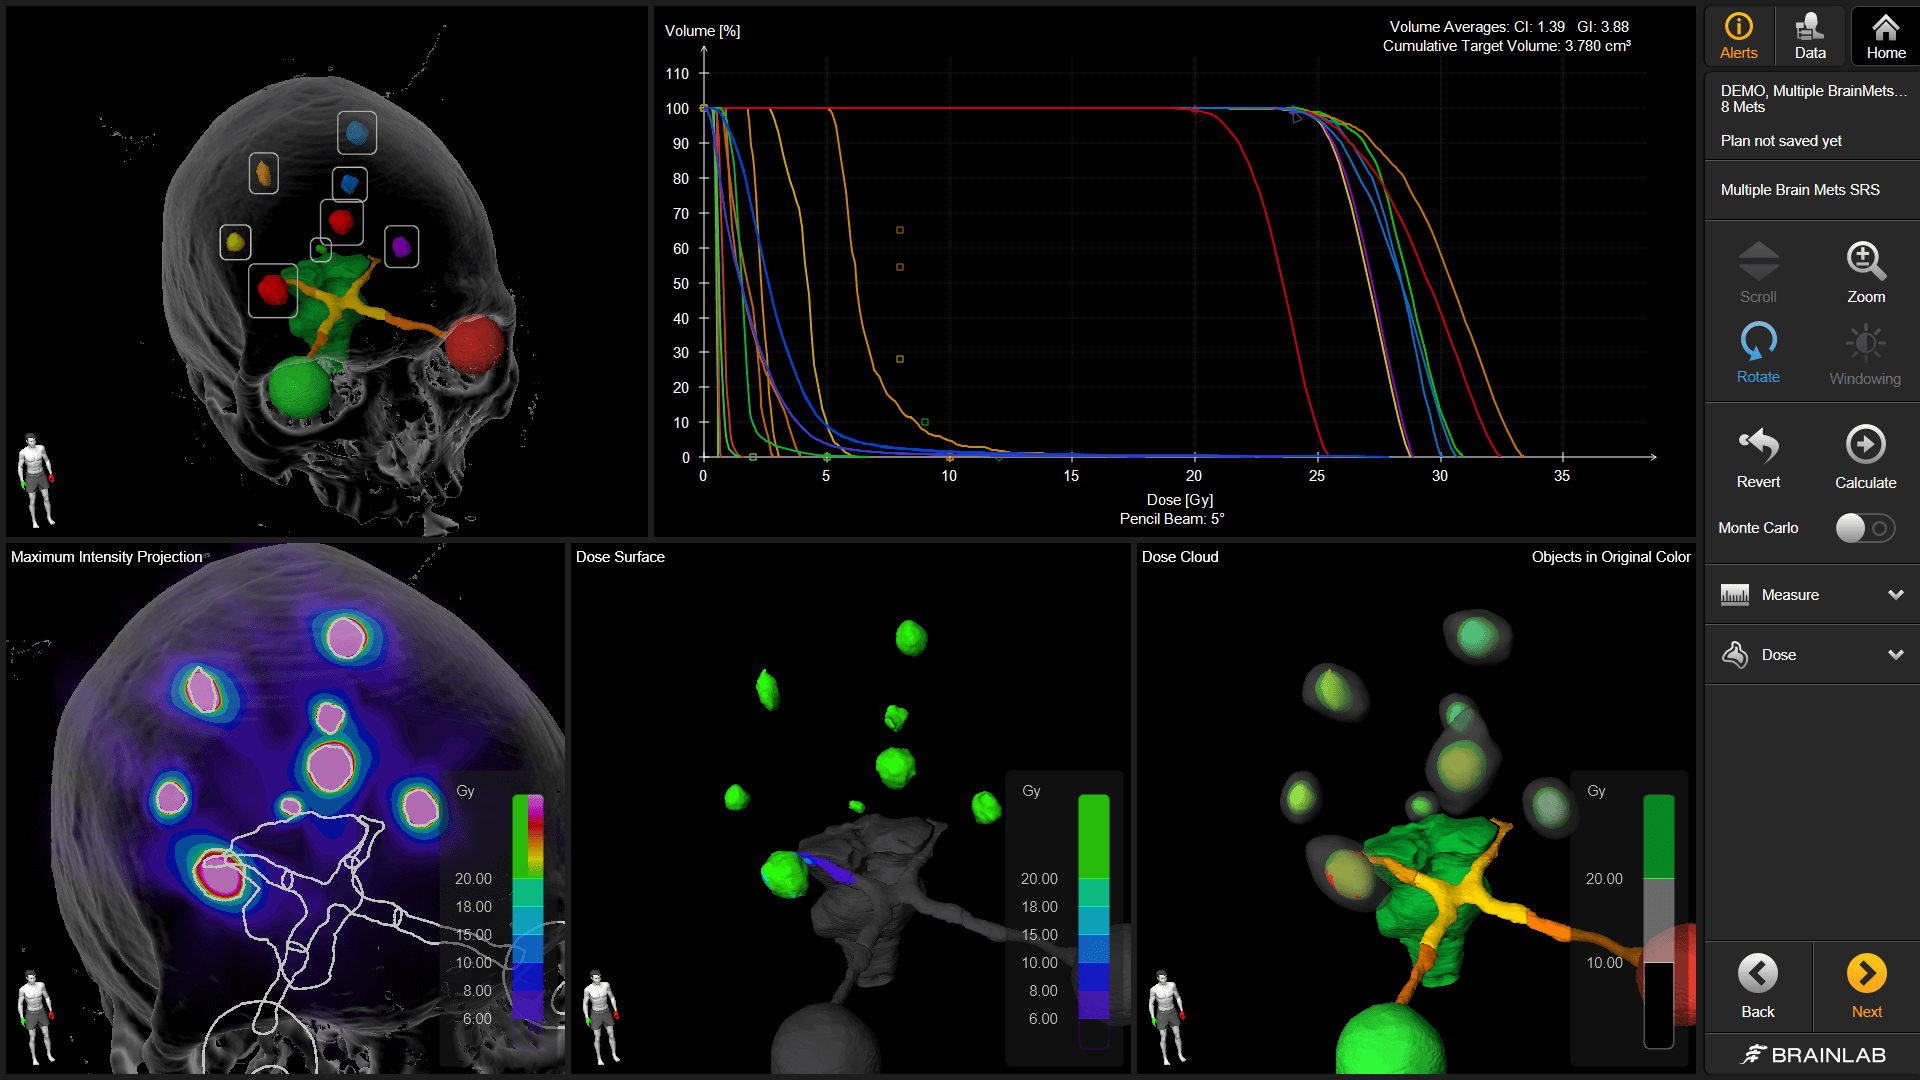 Software screenshot of Brainlab Elements software demonstrating the various views and data available that help users achieve consistent radiotherapy and radiosurgery treatment planning.